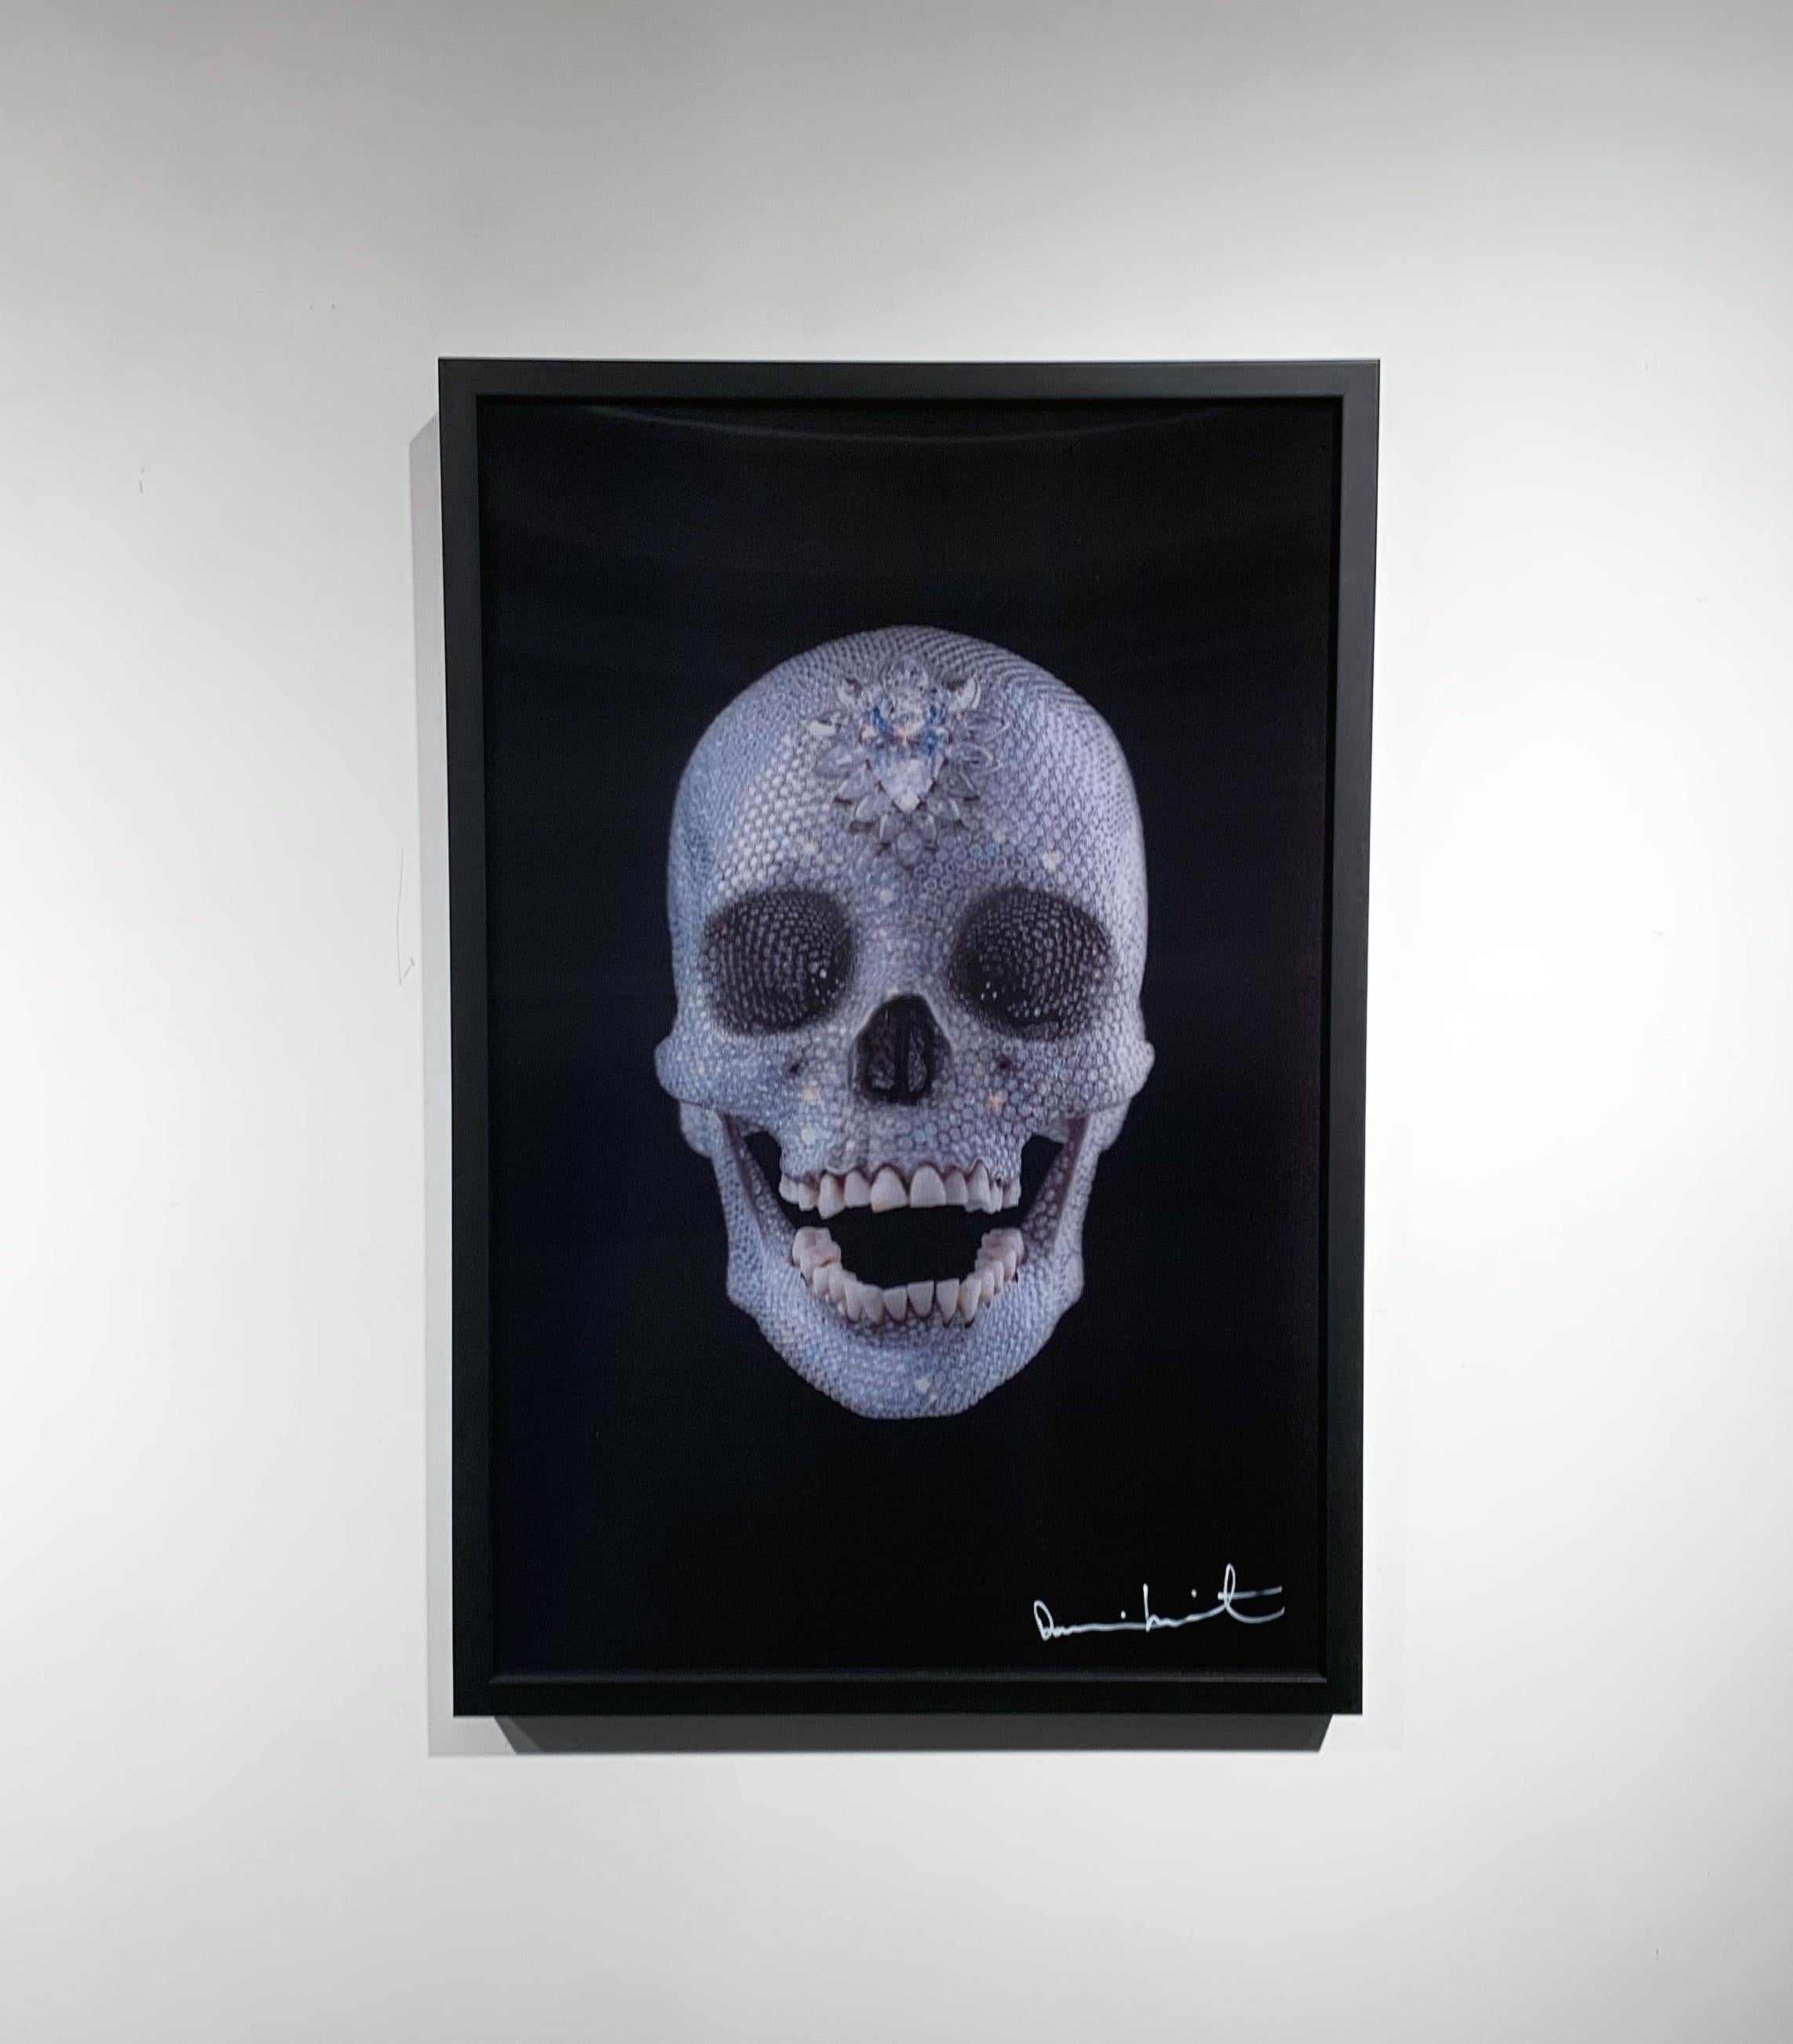 3D Skull (Small) - Young British Artists (YBA) Print by Damien Hirst